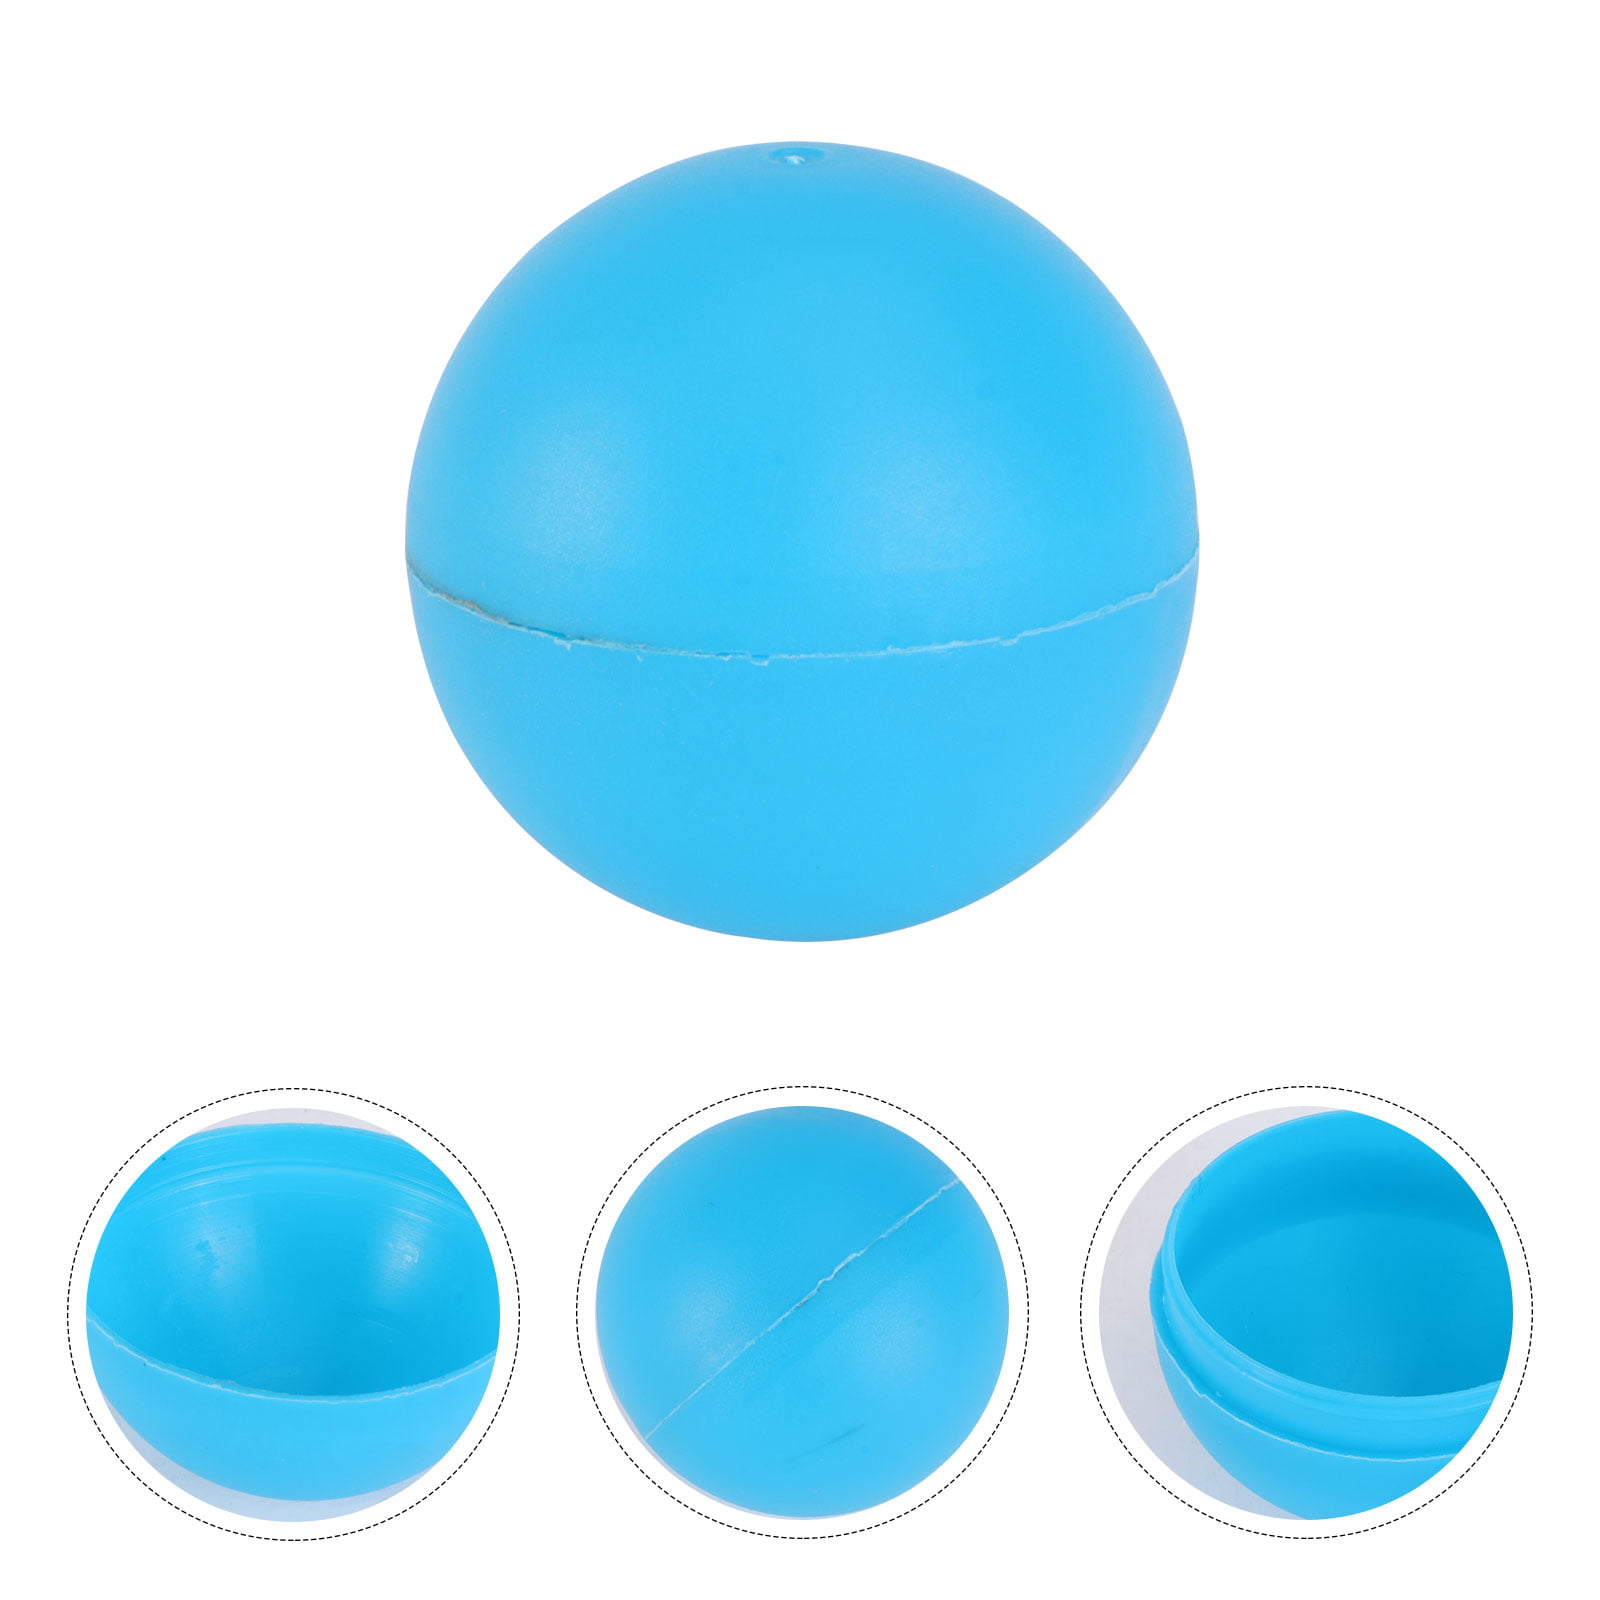 25pcs Lottery Balls Premium Plastic 40mm Ping Pong Balls for Game Party Lottery 